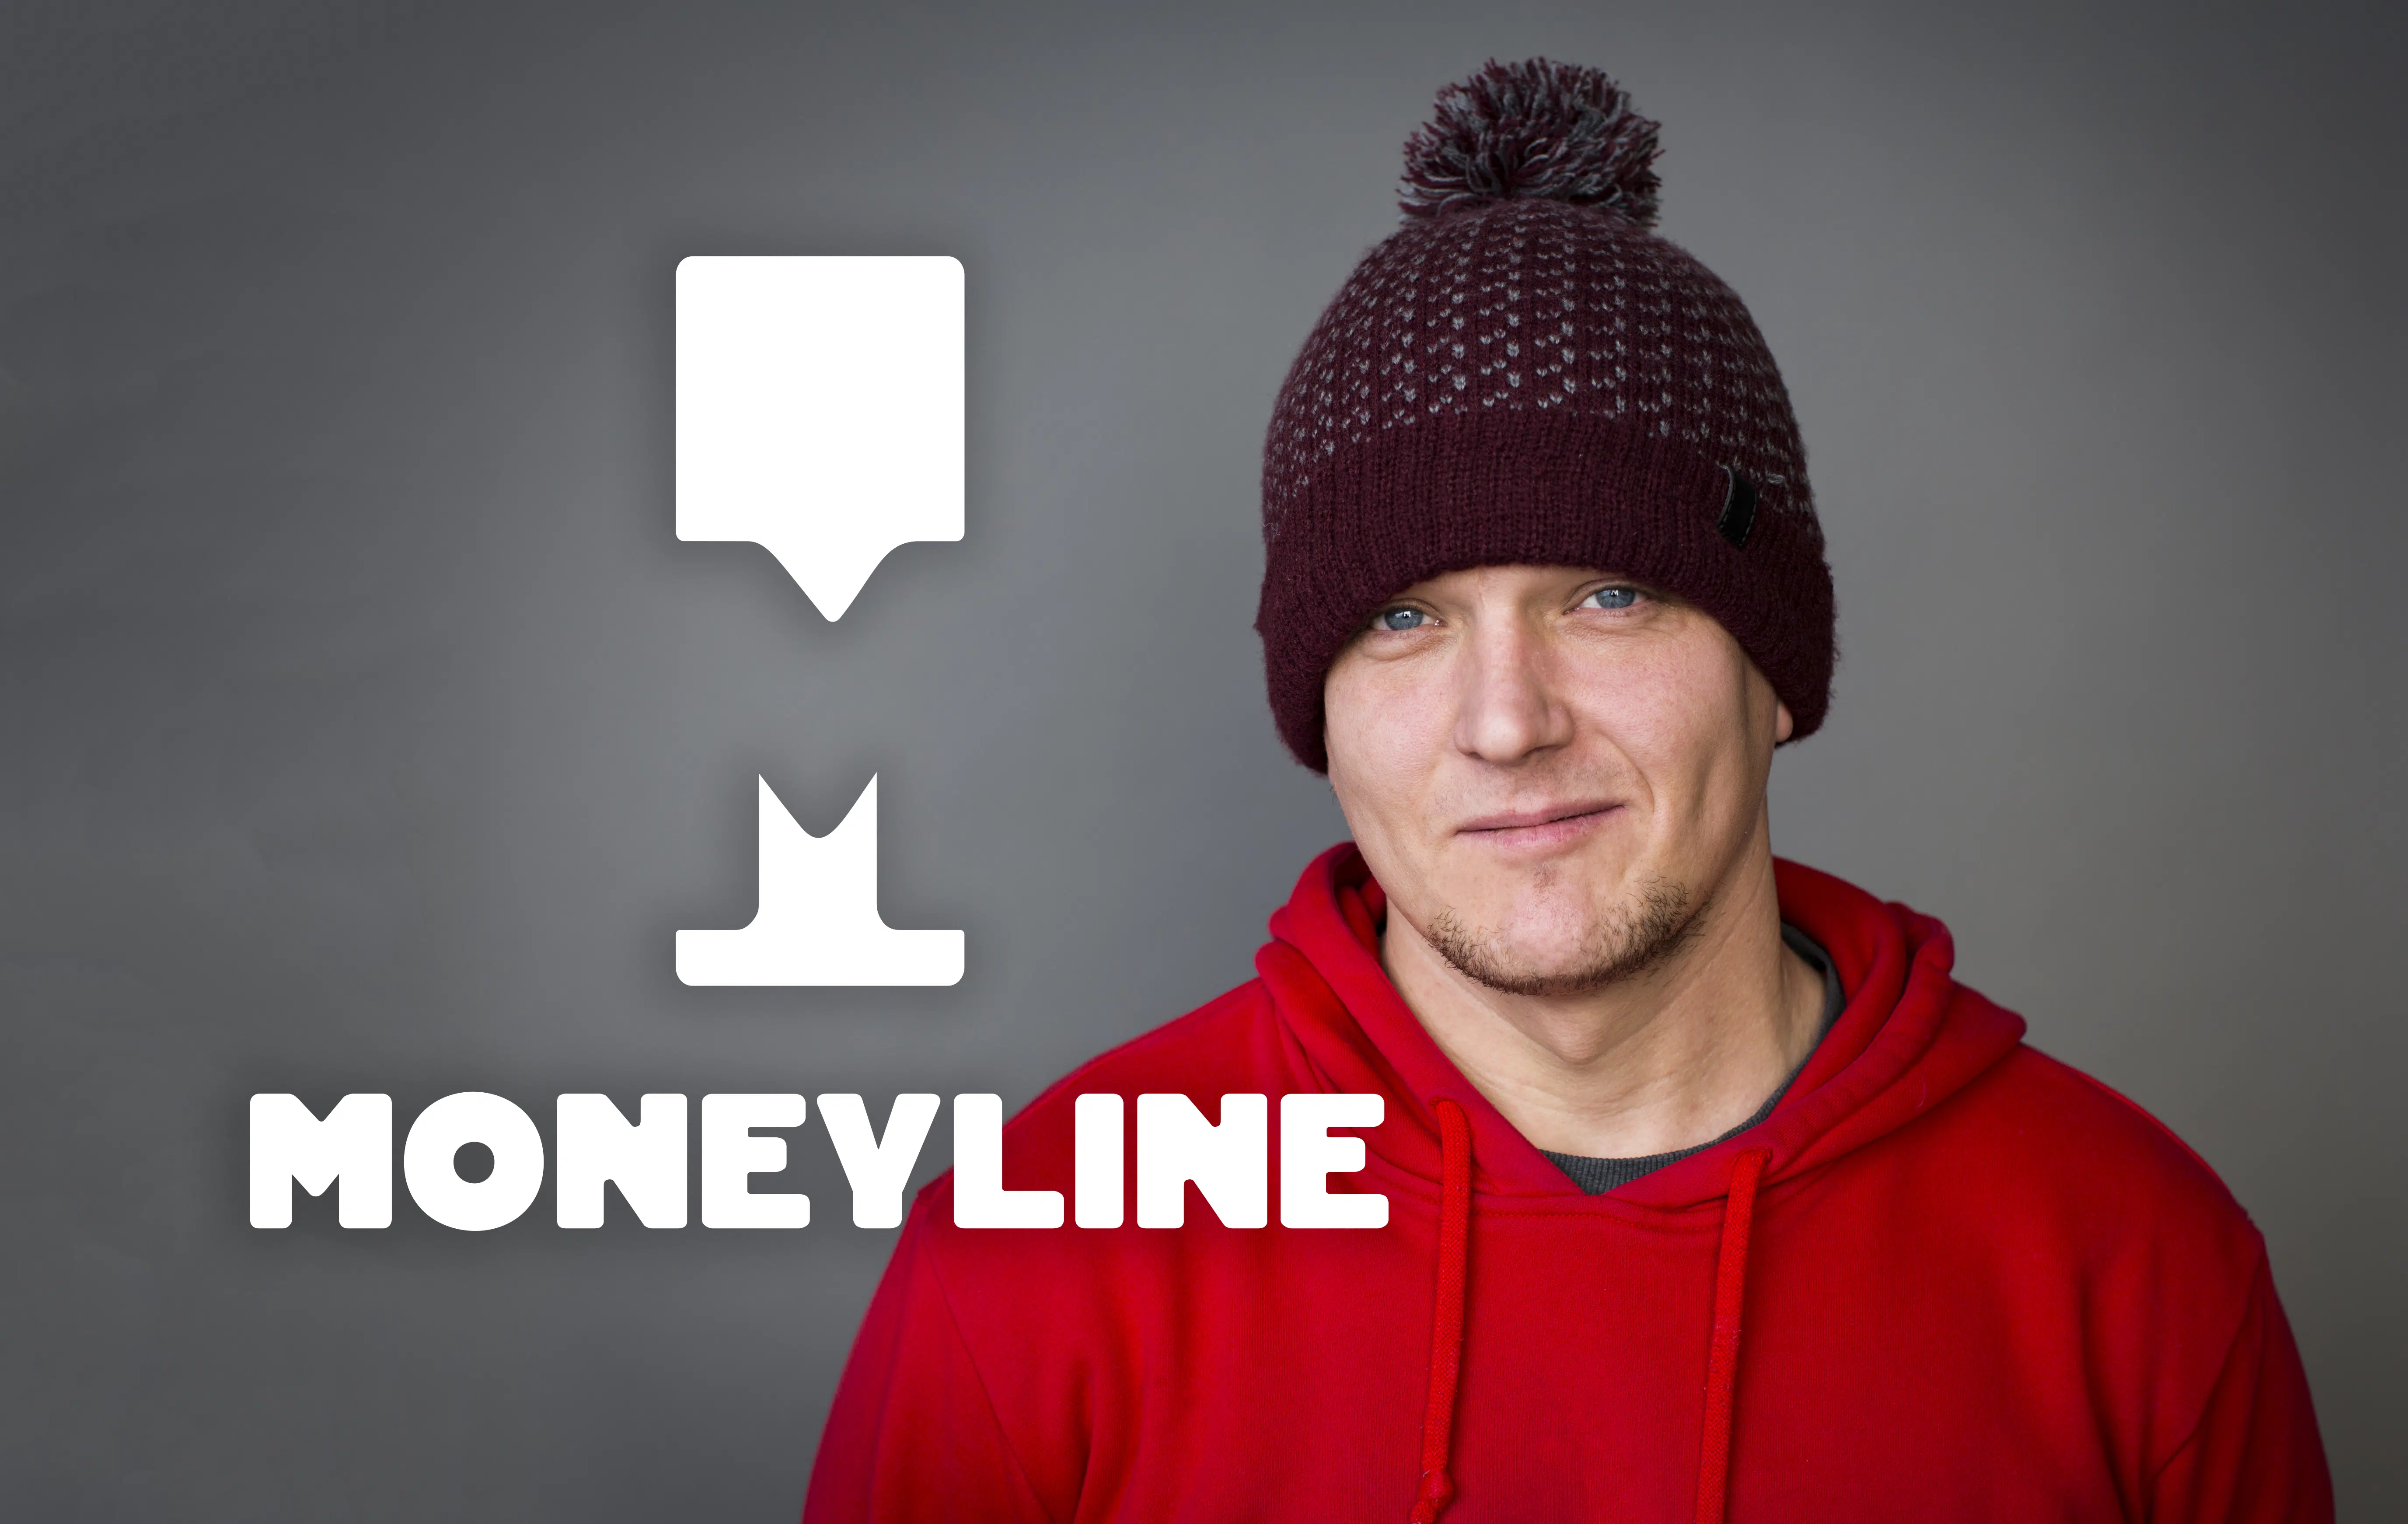 Man with hat and red jumper with a logo Moneyline